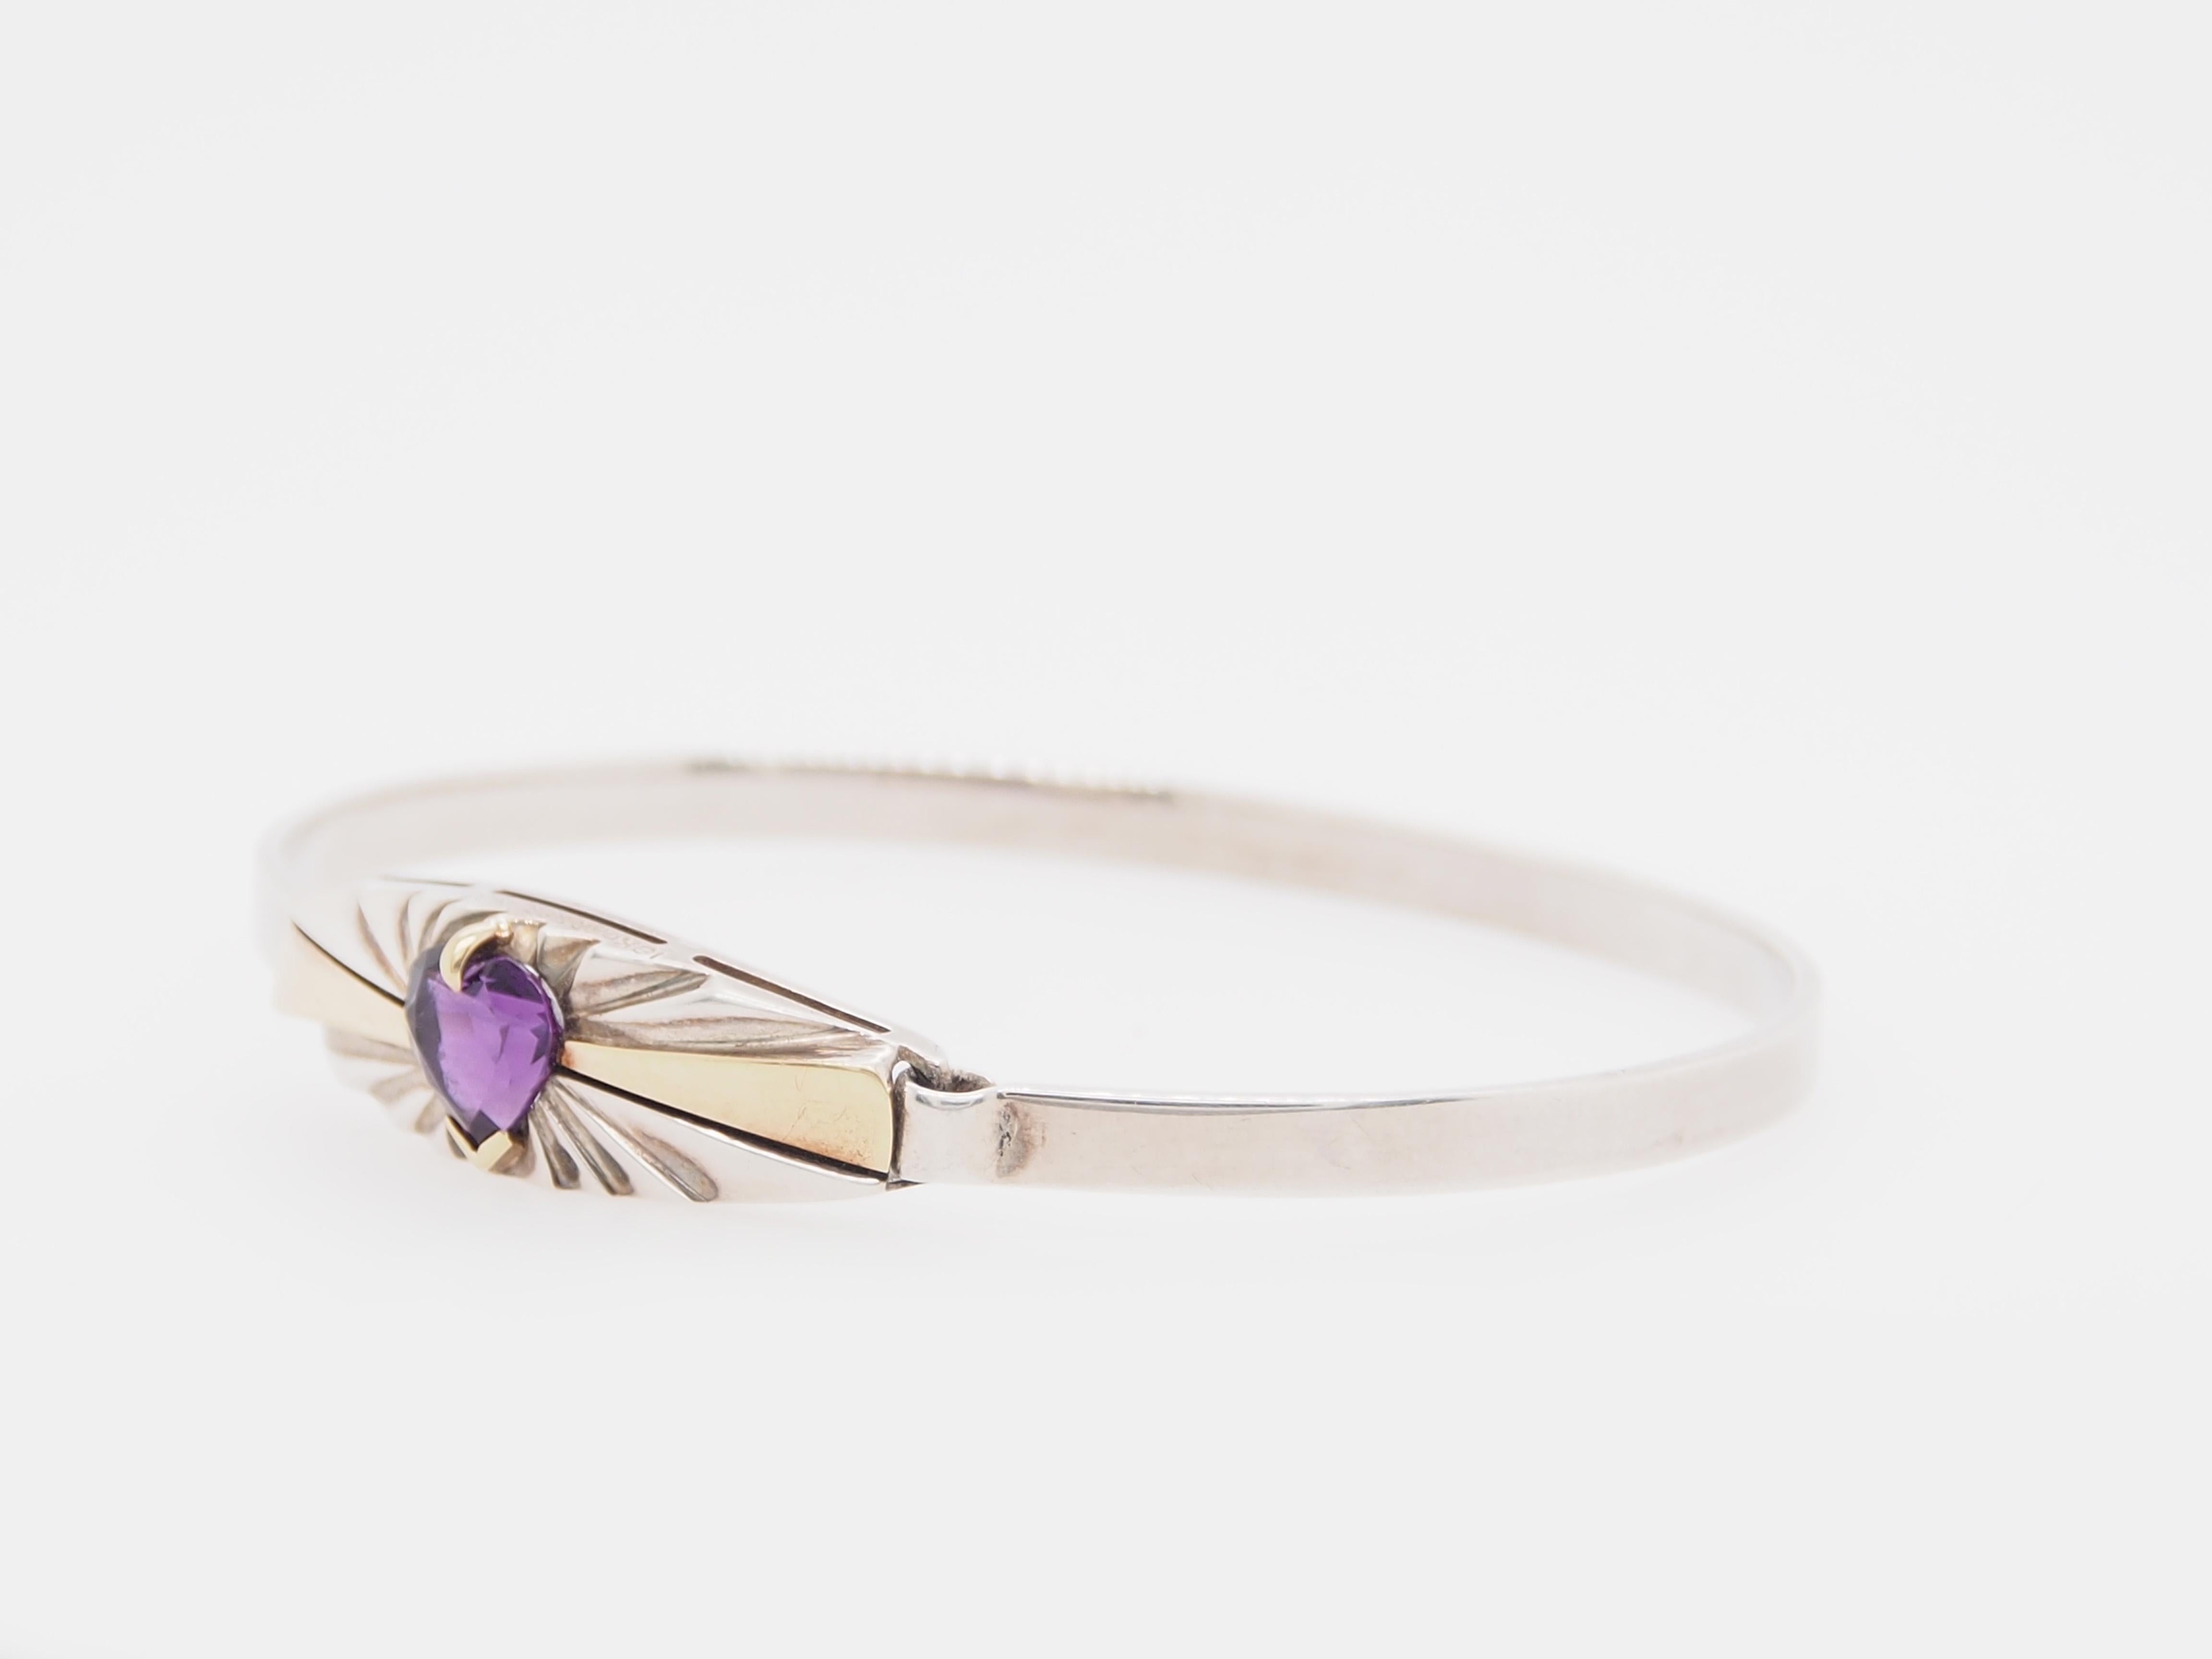 Vintage Cartier 18K Yellow Gold and Silver Bangle. The clasp in enhanced with a Heart Shaped Purple Amethyst. The Bangle measures 6 inches on the inside circumference and the clasp measures 1 1/4 inch in length and 3/8 inch wide. Stamped 